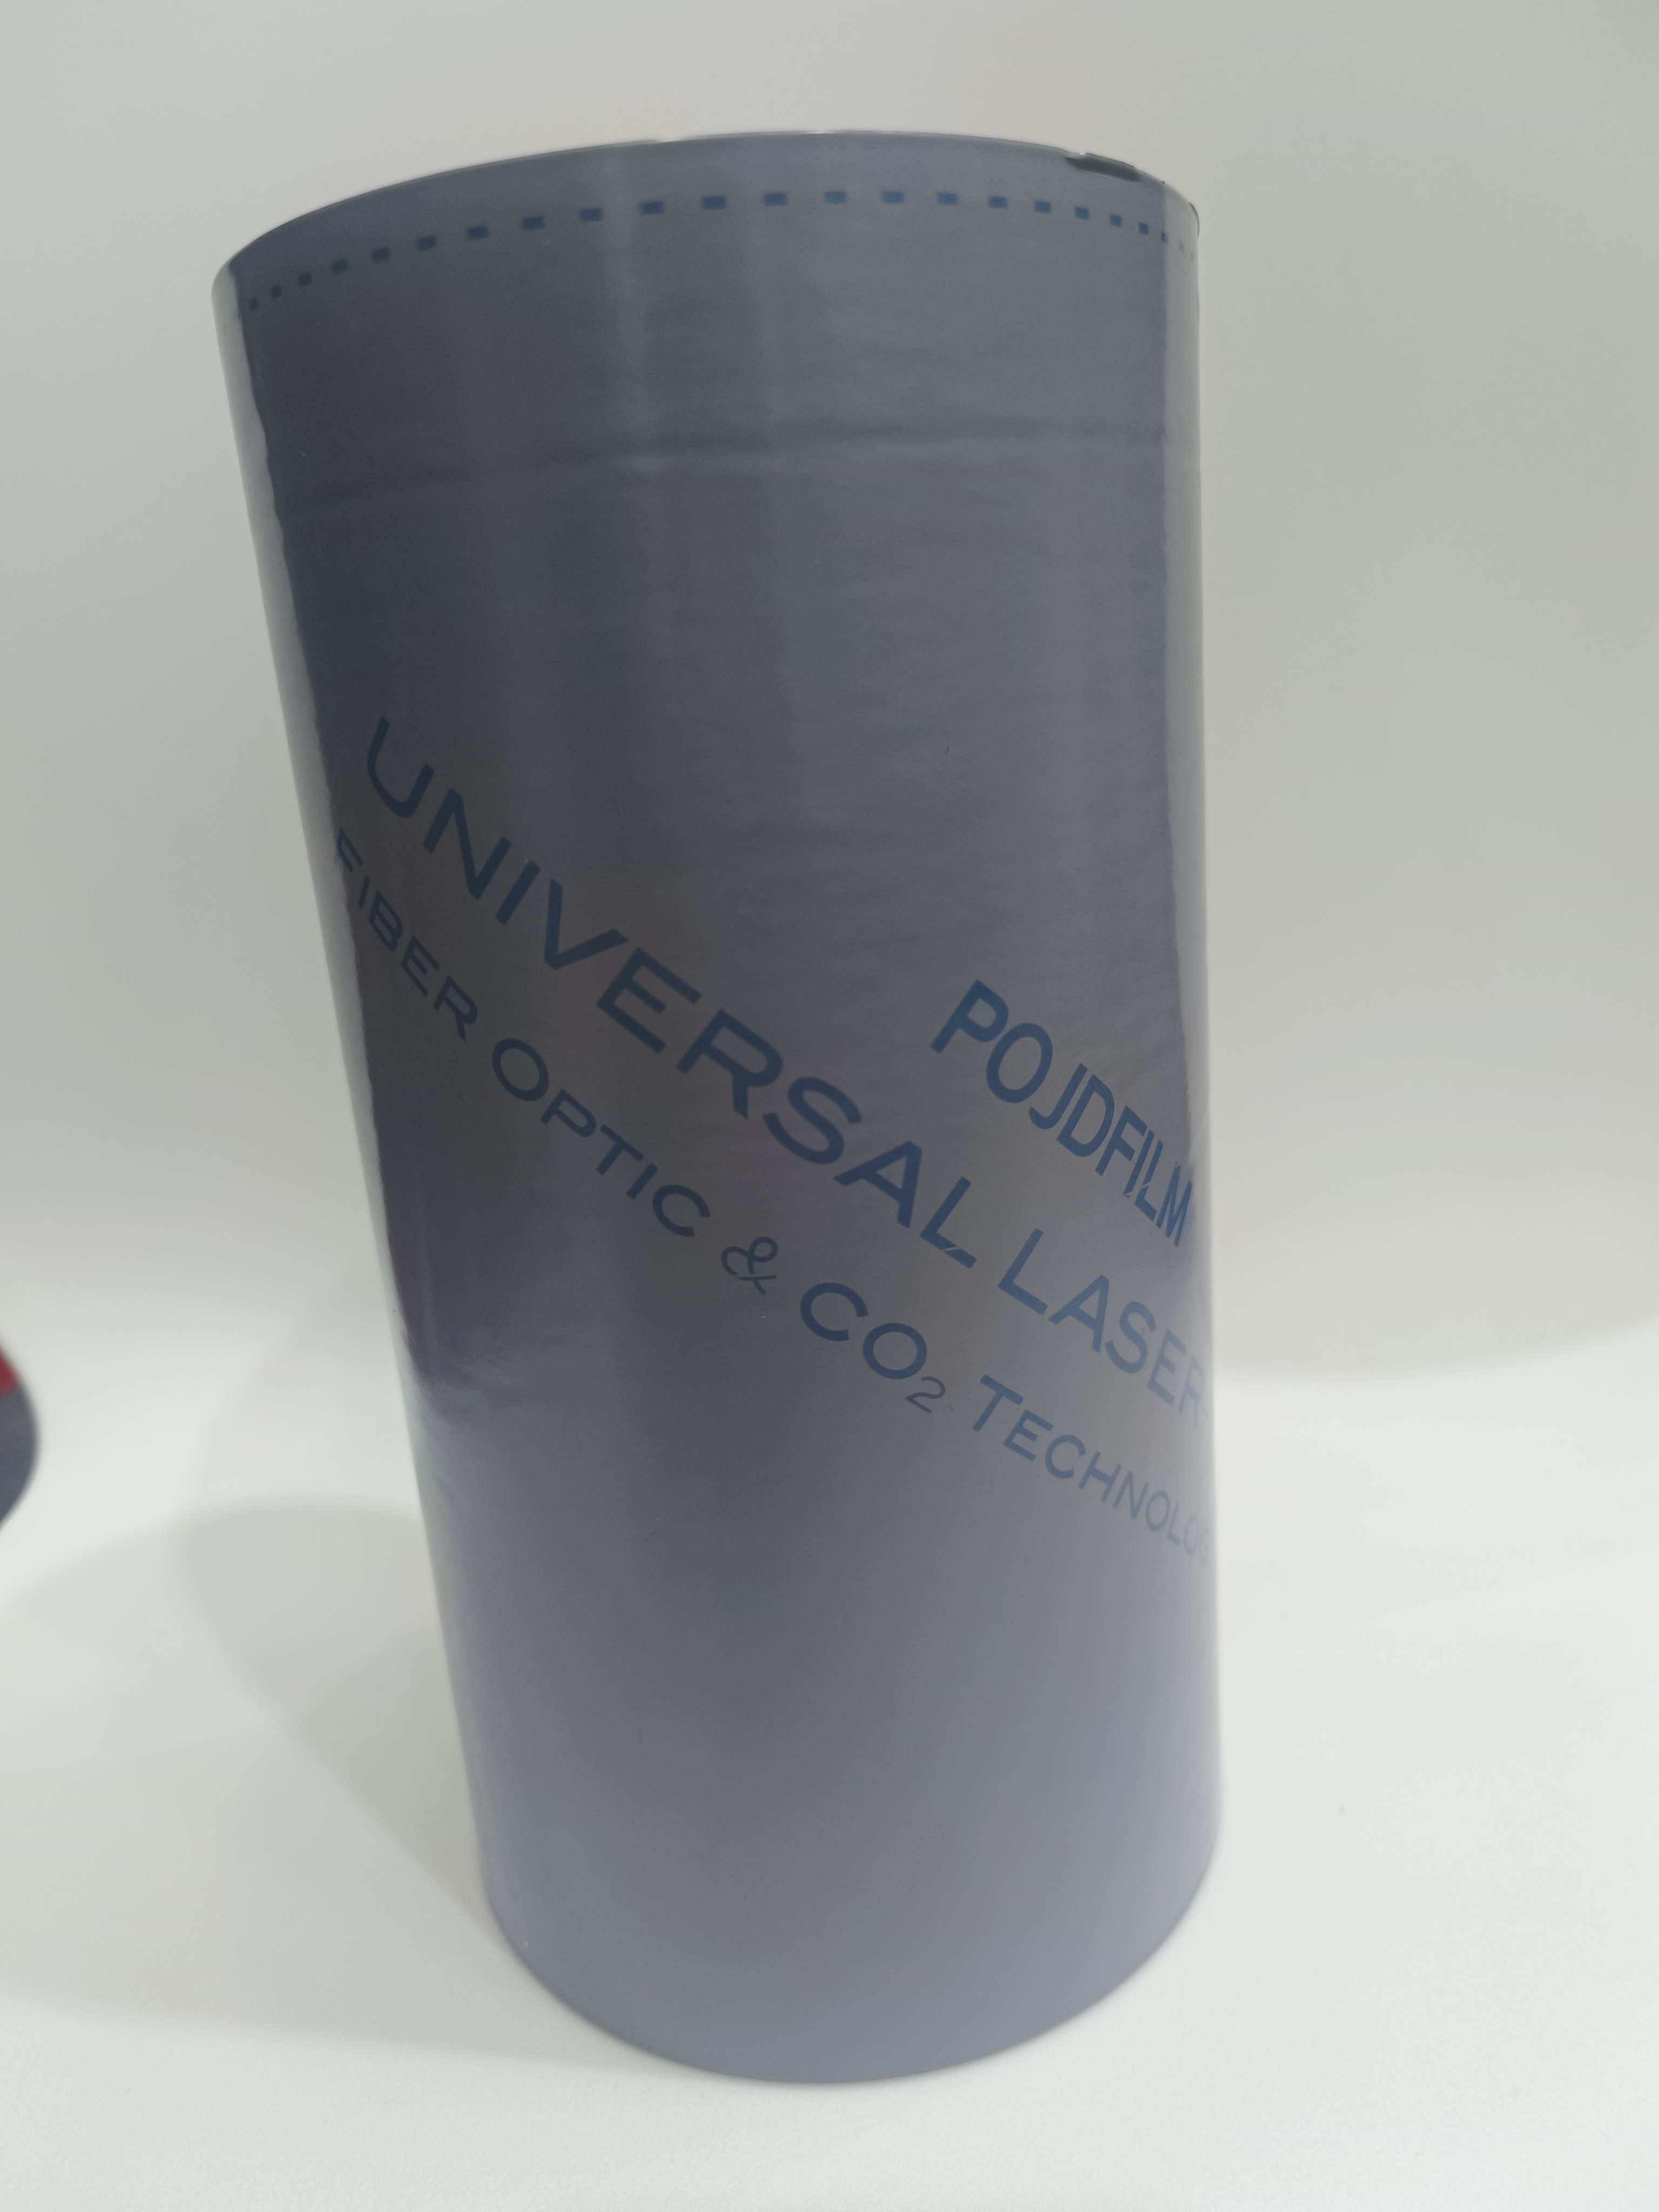 Premium Laser Cutting Protective Film Supplier in China